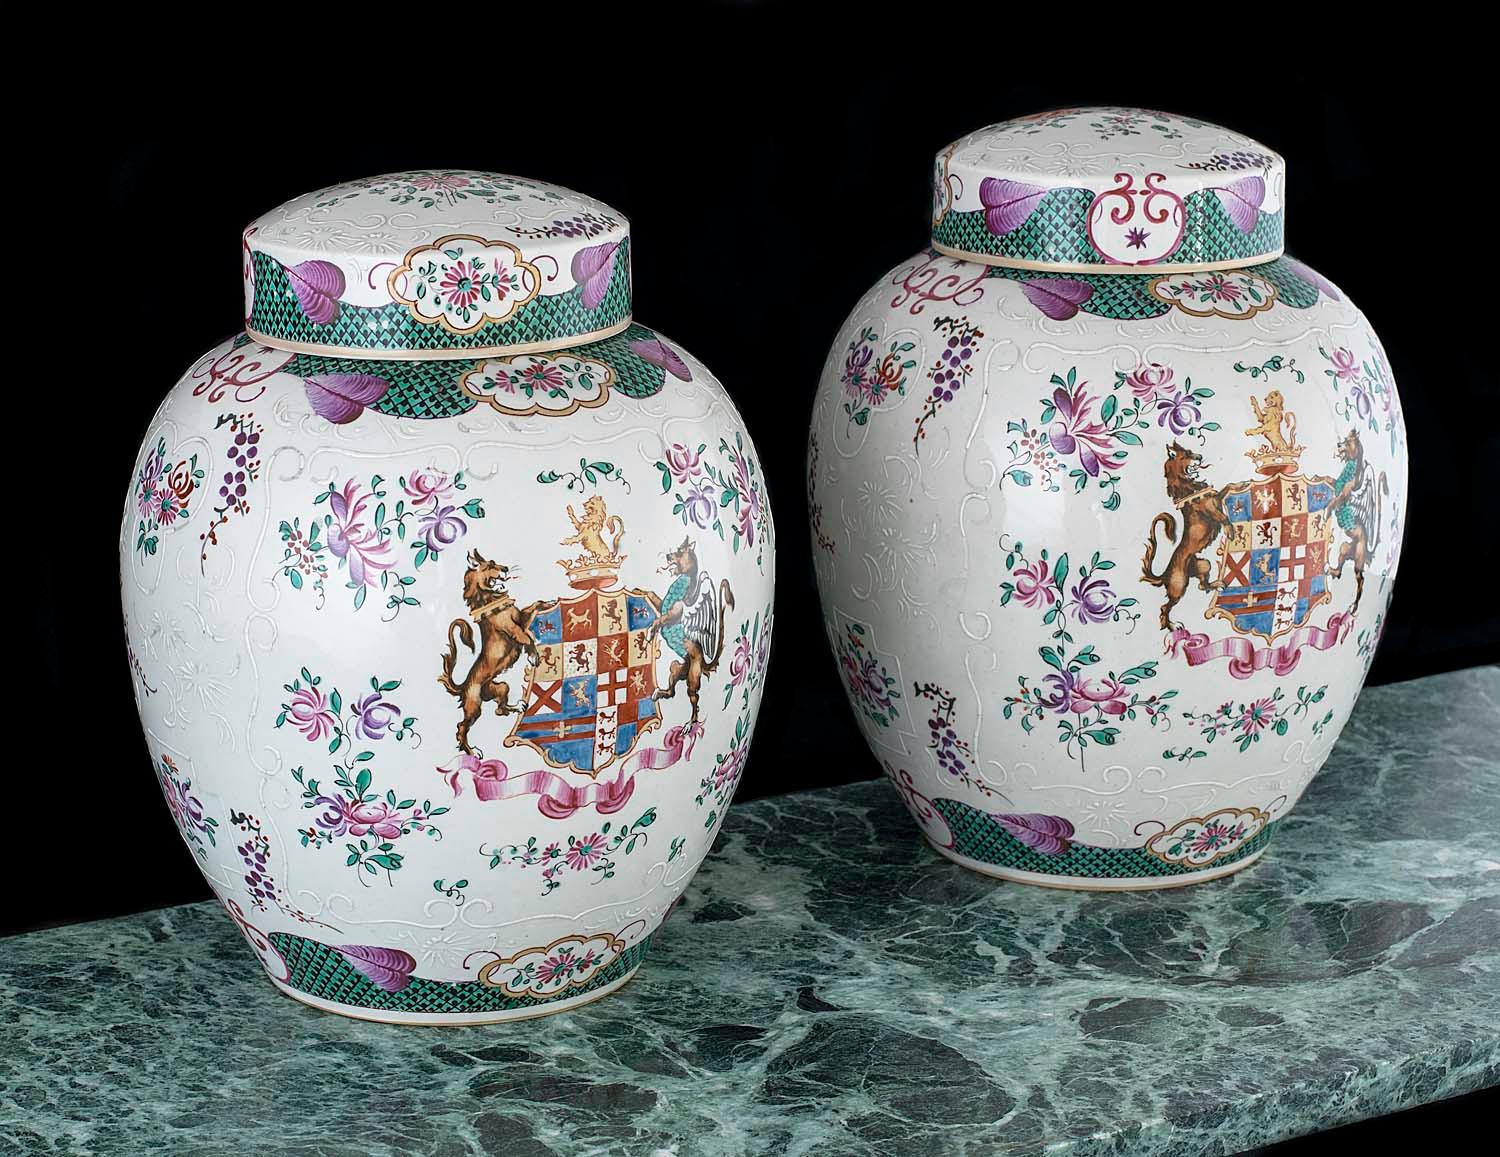 A large and fine pair of porcelain armorial lidded vases with meticulously hand painted molded and enamelled family crests and foliate decoration made by Edmé Samson (b Paris, 1810; d Paris, 1891), and were probably intended to be used as ginger